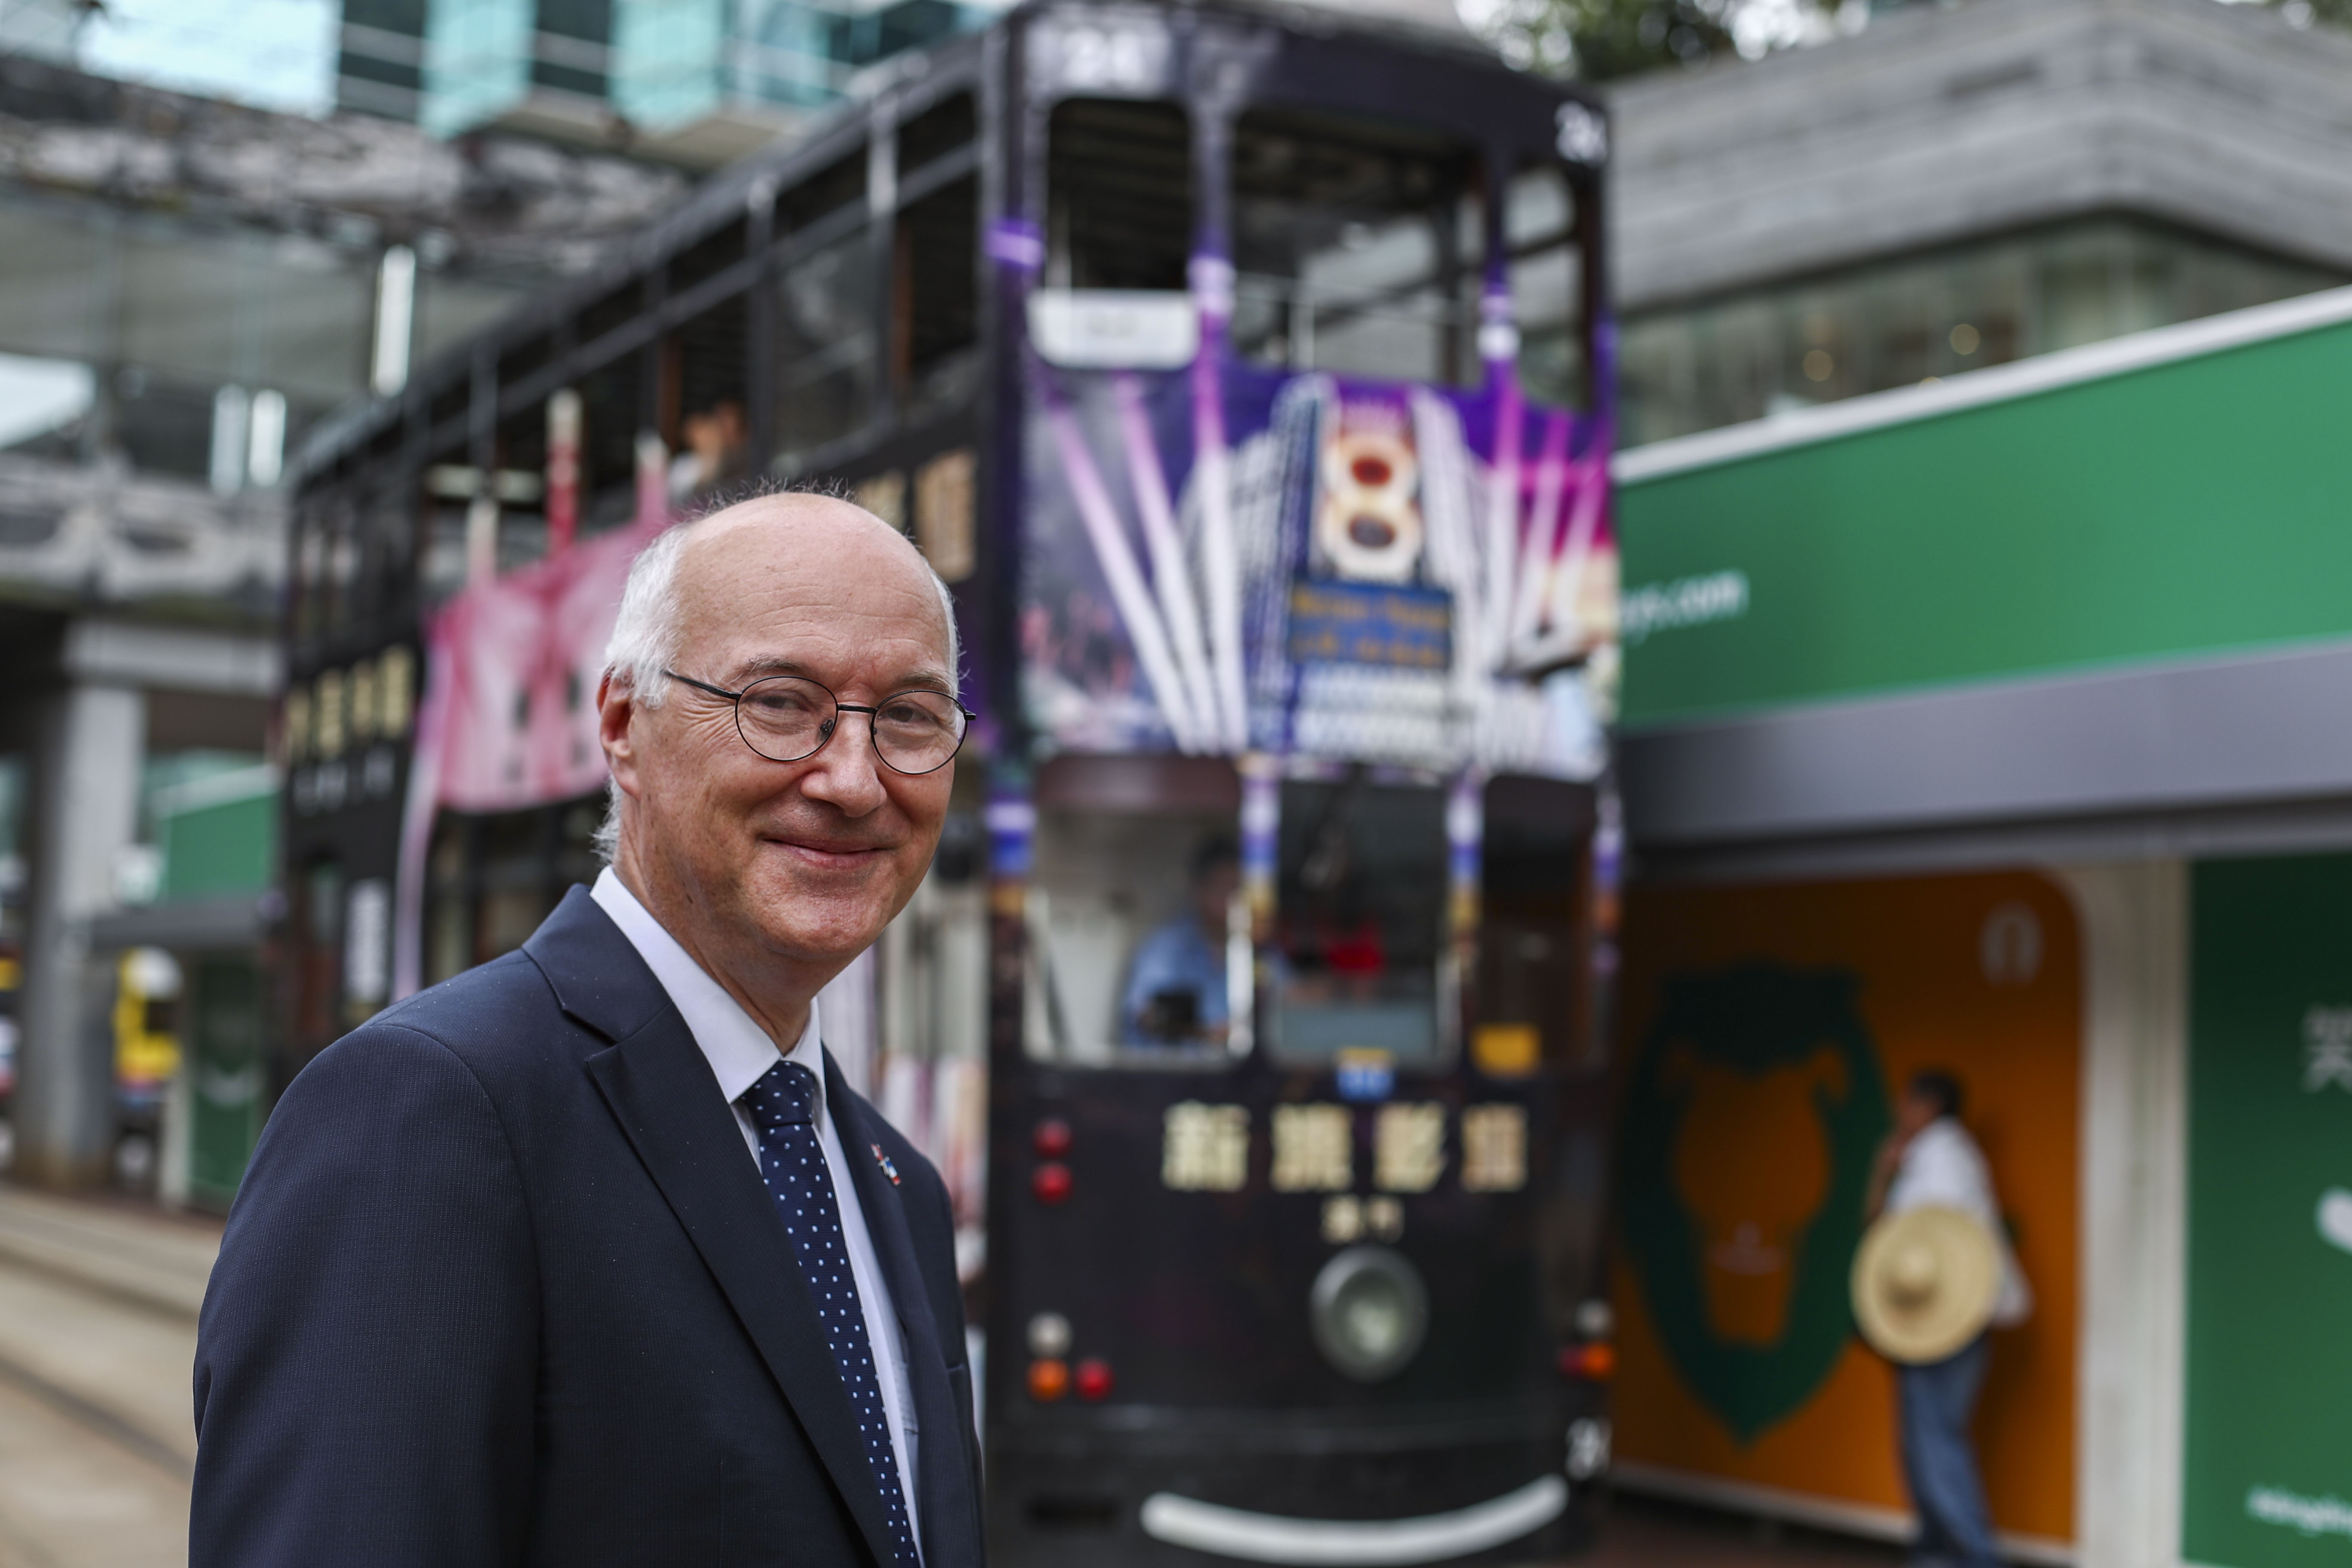 Eric Berti, consul general of France in Hong Kong and Macau, stands at a tram stop. The iconic Hong Kong trams are owned by a French company. Photo: Nora Tam